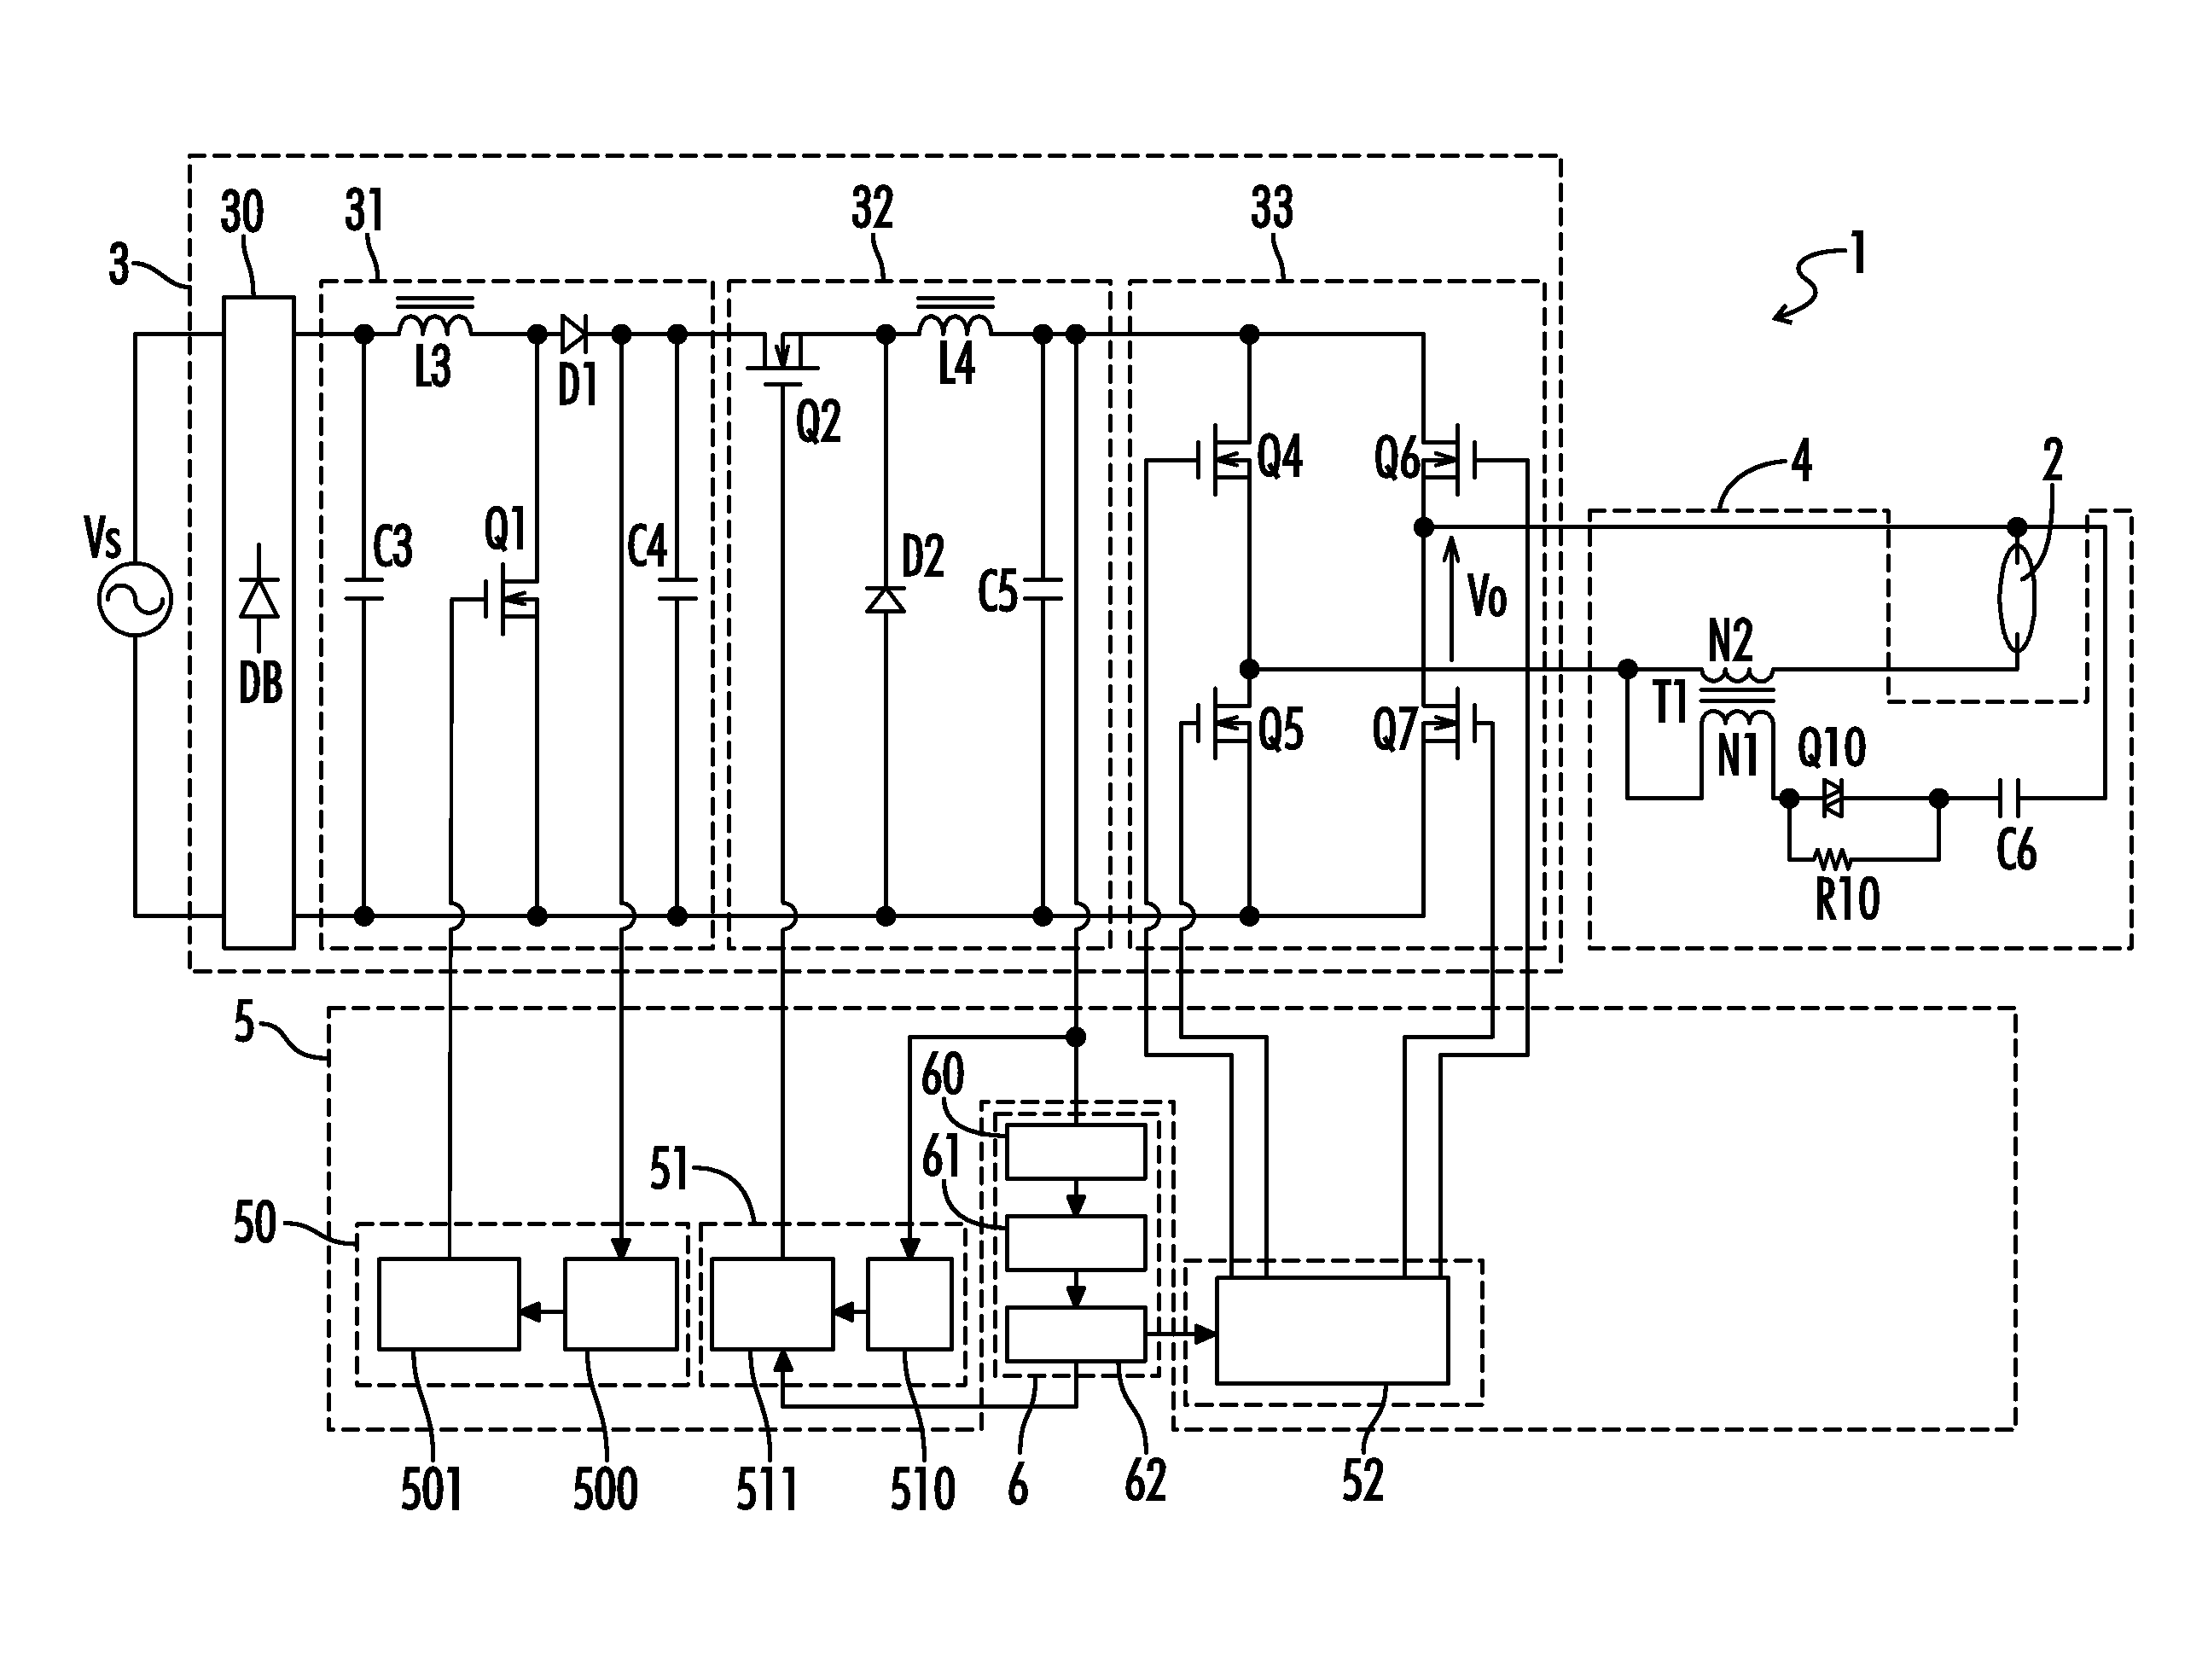 Electronic ballast for restarting high-pressure discharge lamps in various states of operation